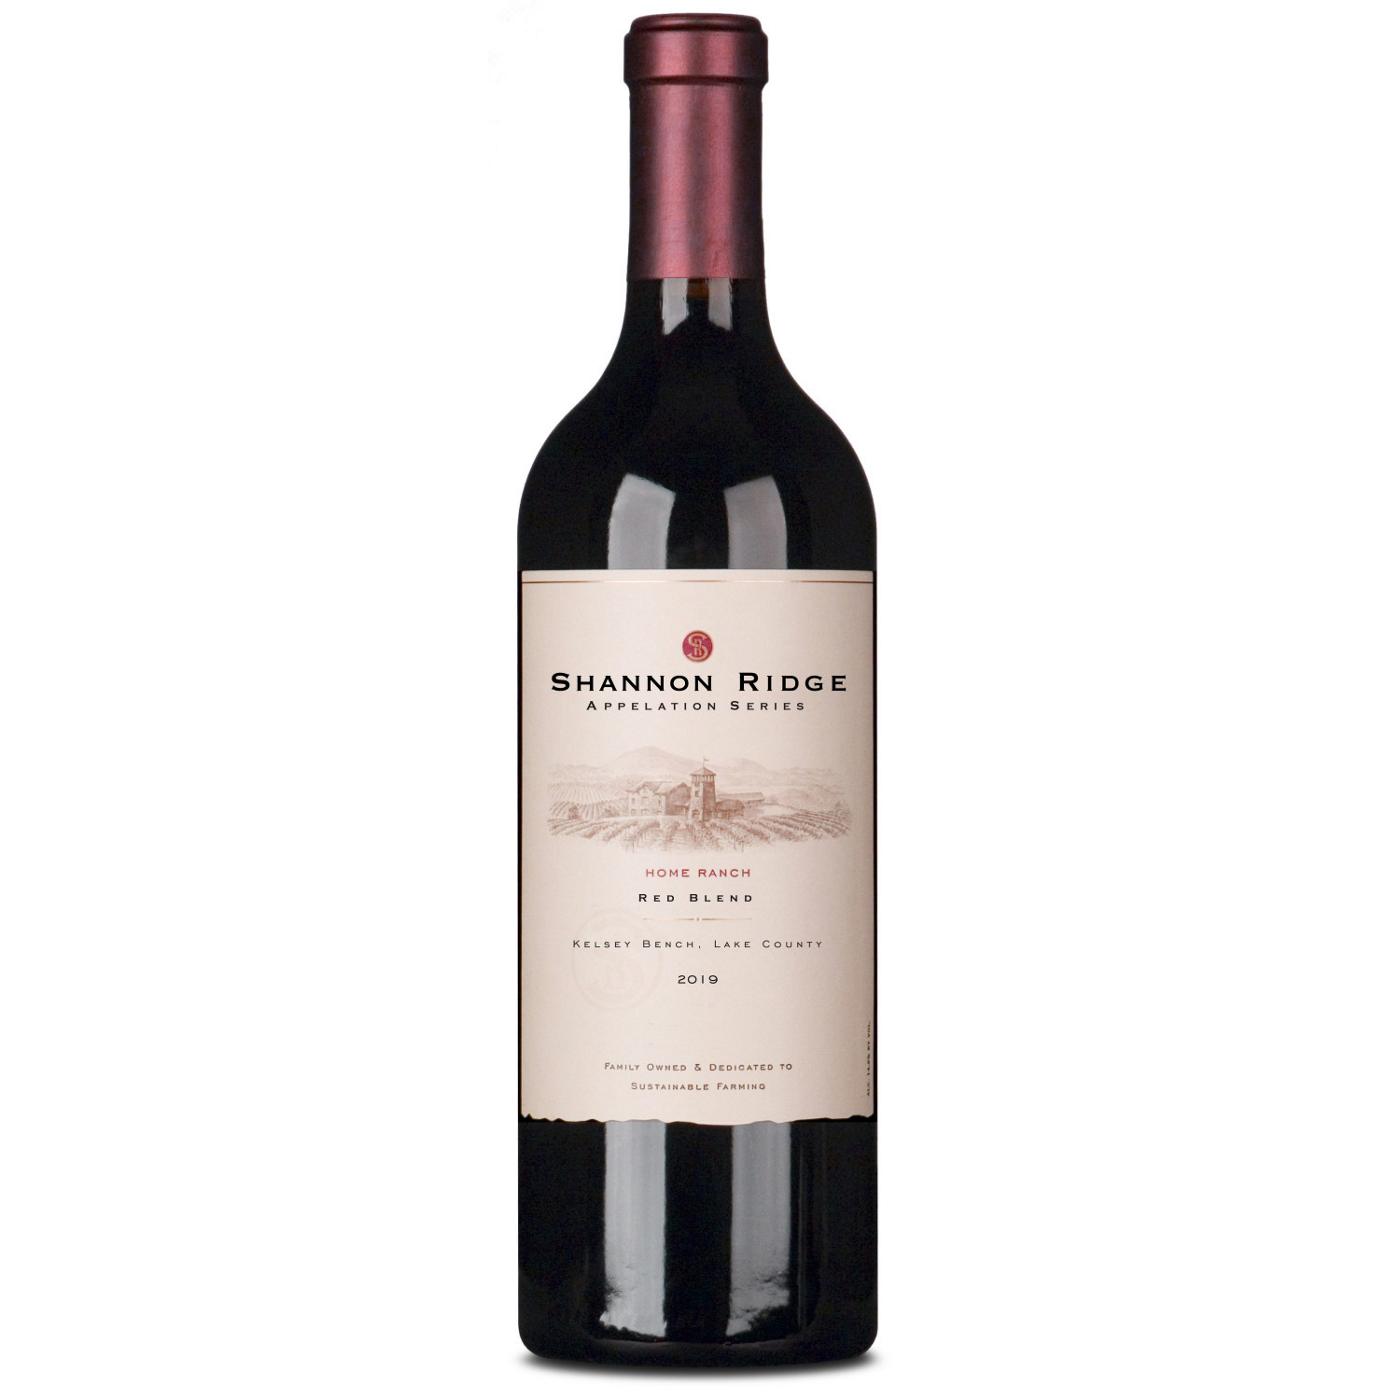 Shannon Ridge Home Ranch Red Blend; image 1 of 3